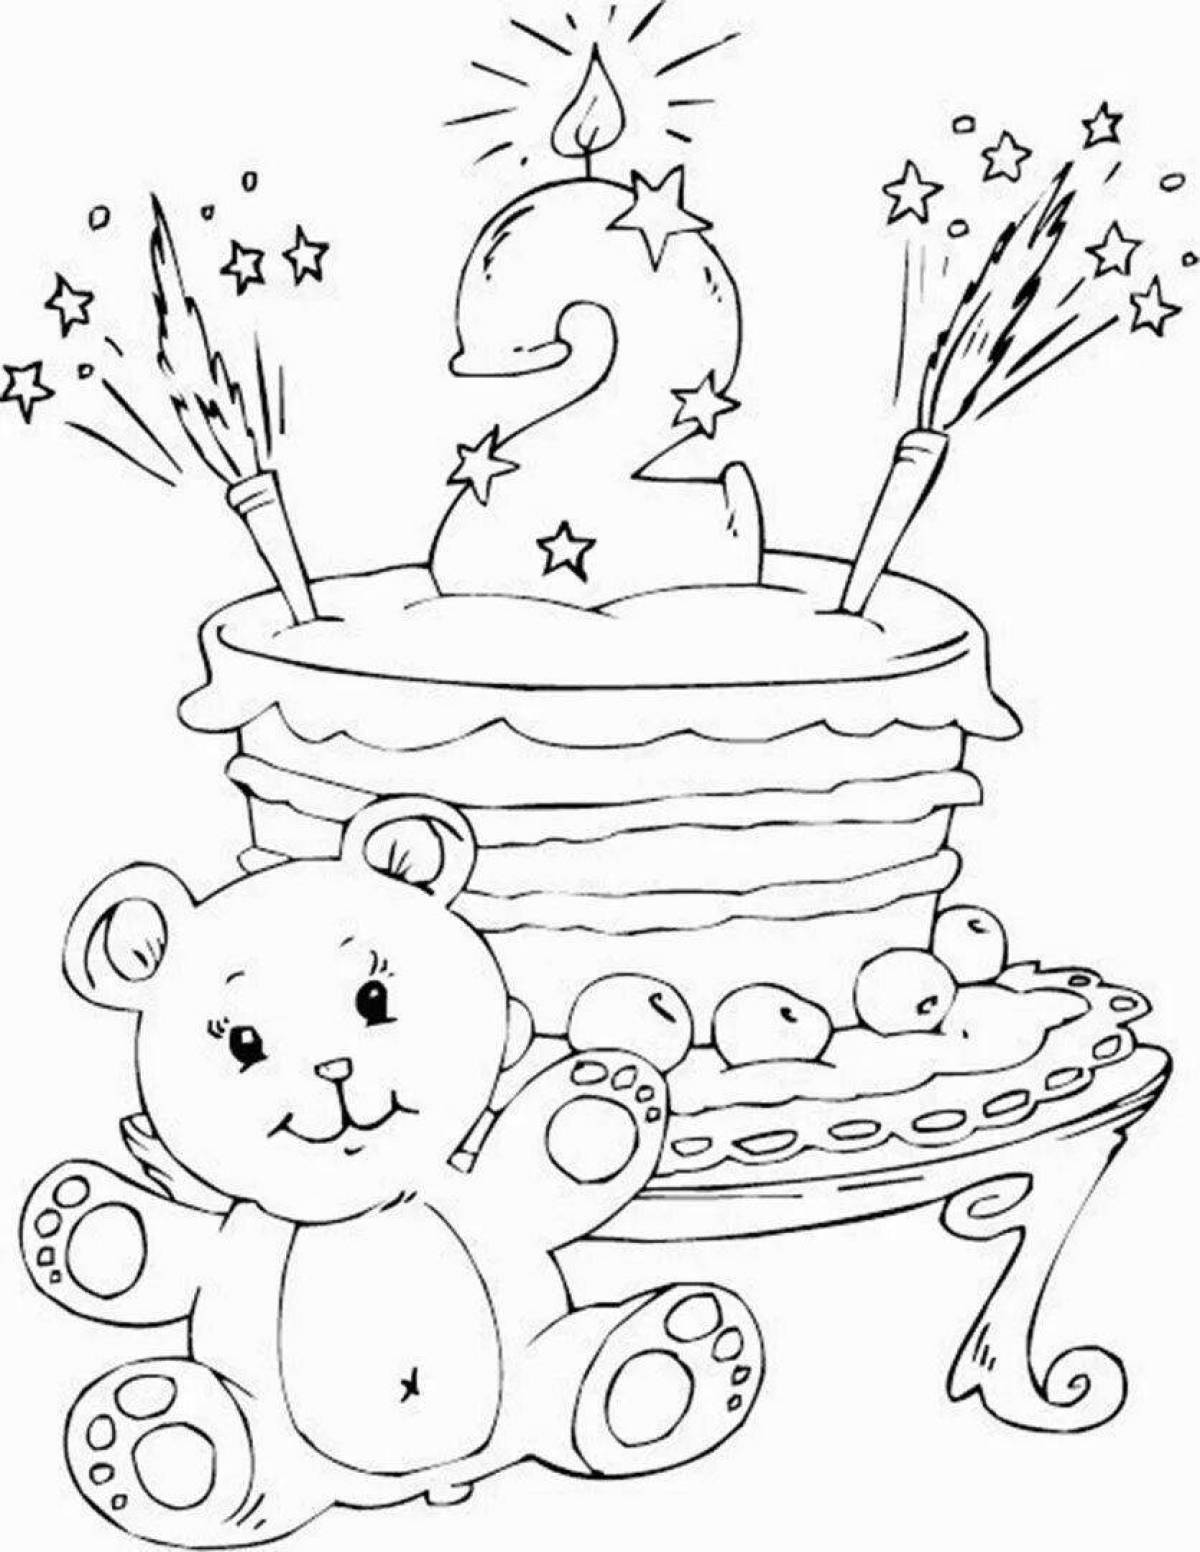 Exotic happy birthday coloring book for kids